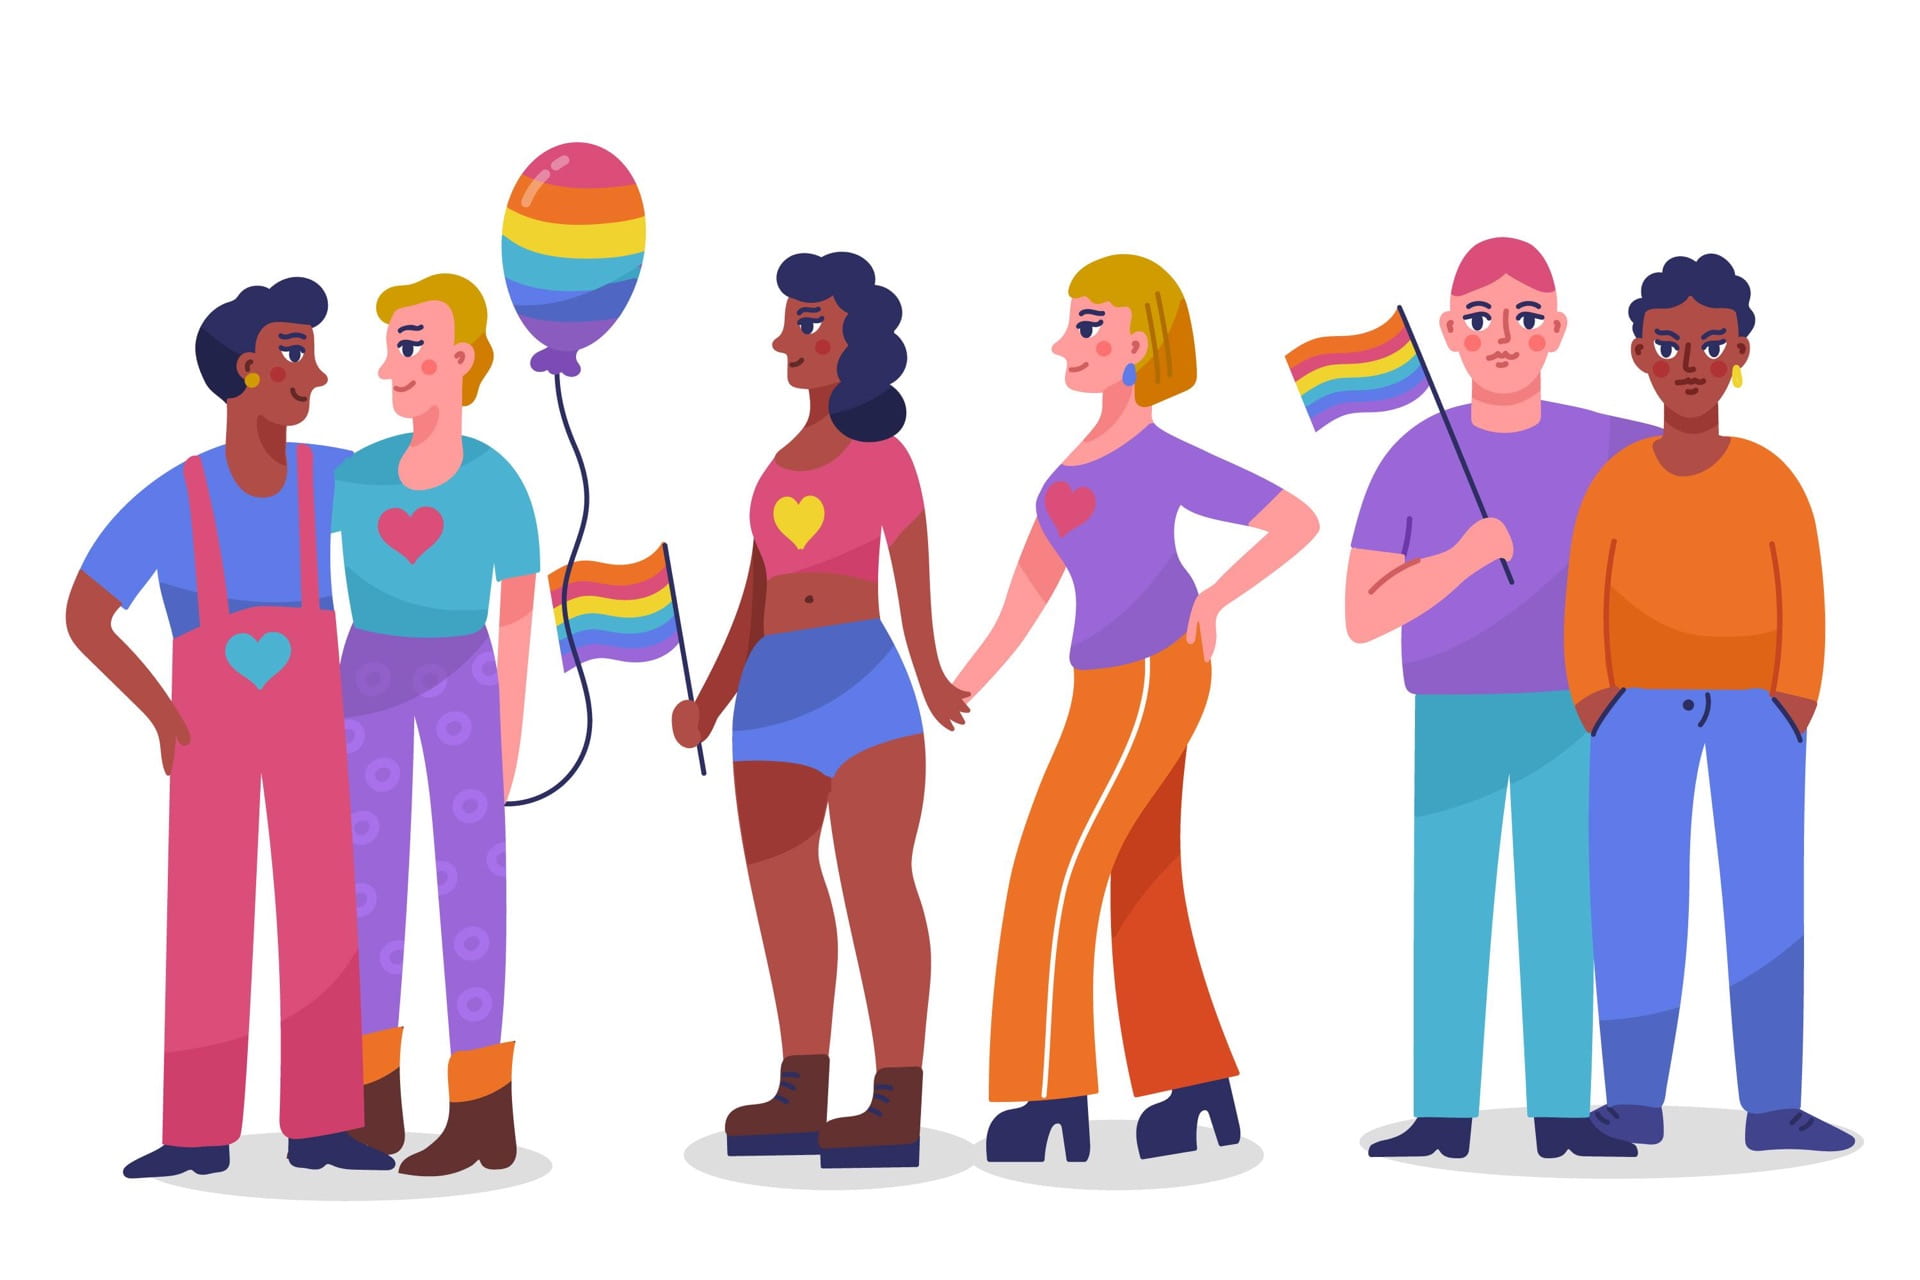 The image is a drawing of multiple individuals with pride flags